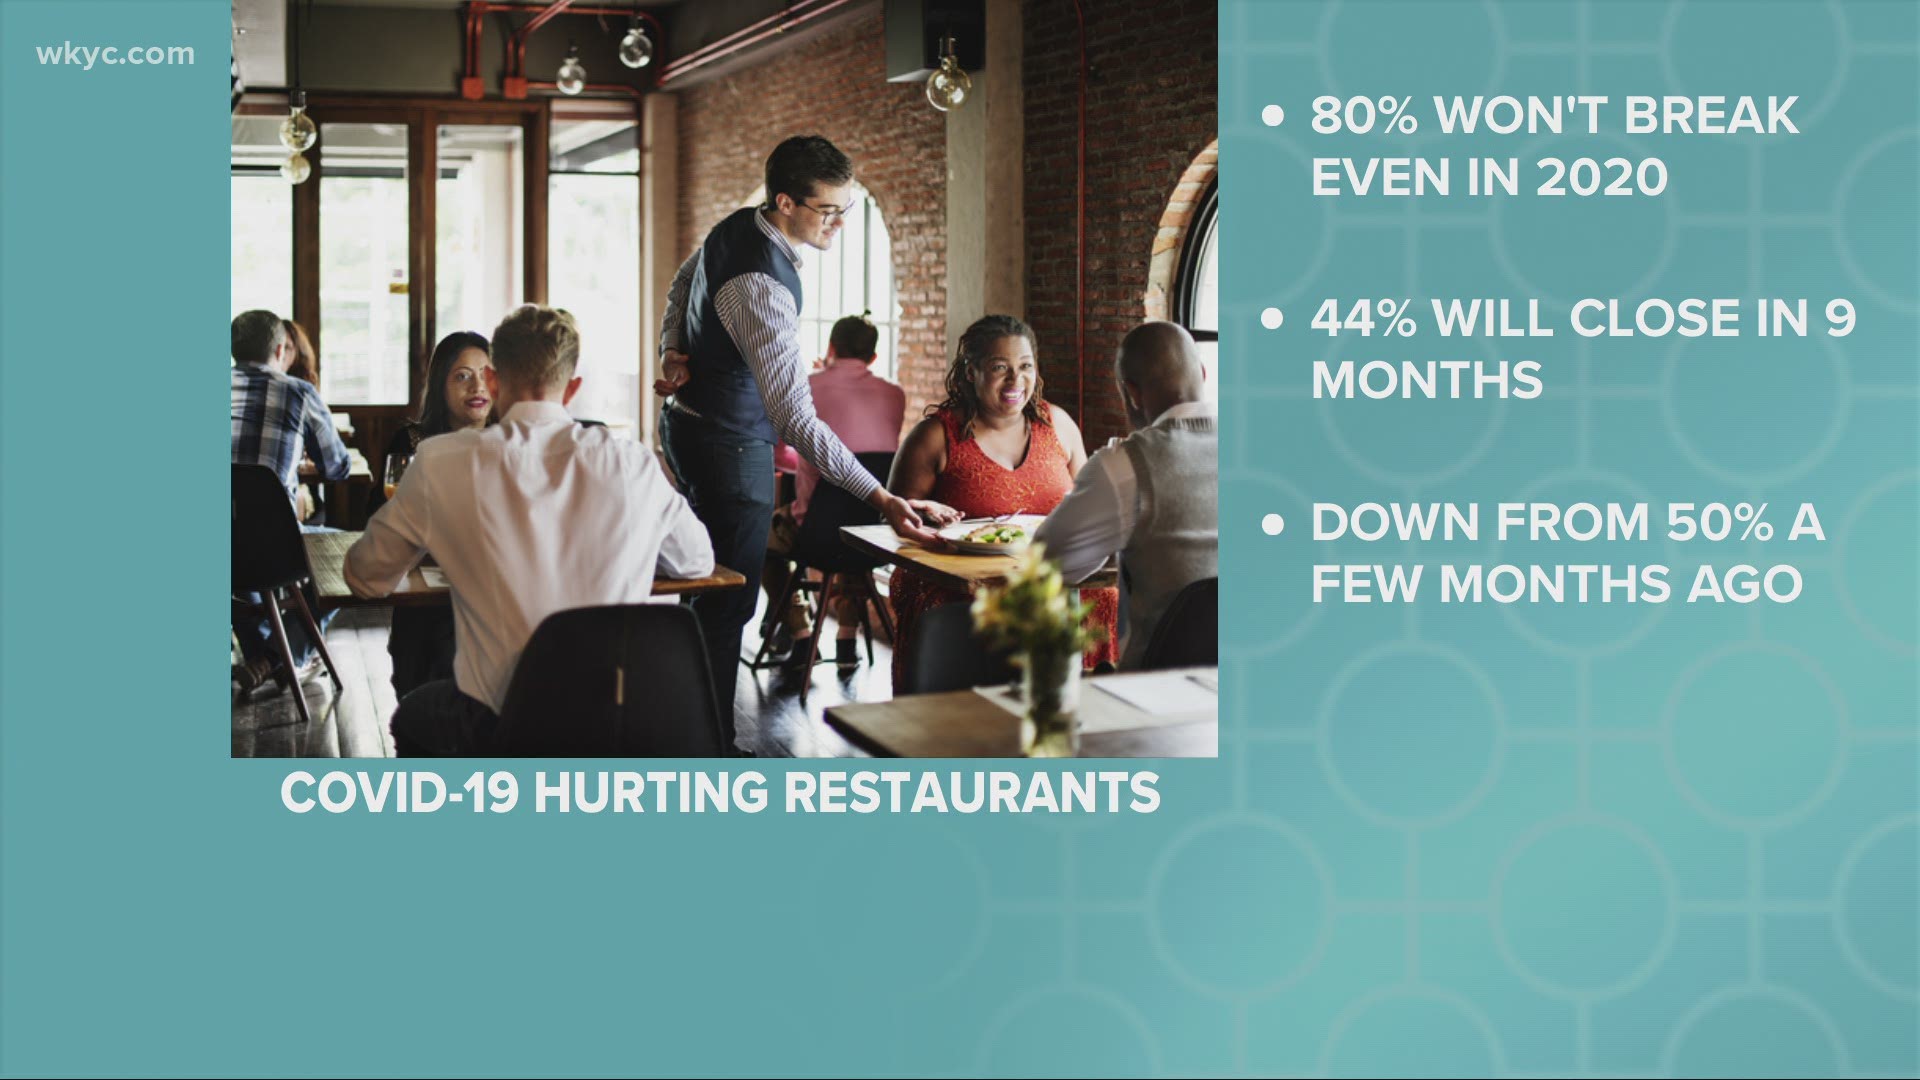 Local restaurants are hurting.  According to the Ohio Restaurant Association's most recent survey, 80% of restaurants say they won't break even this year.